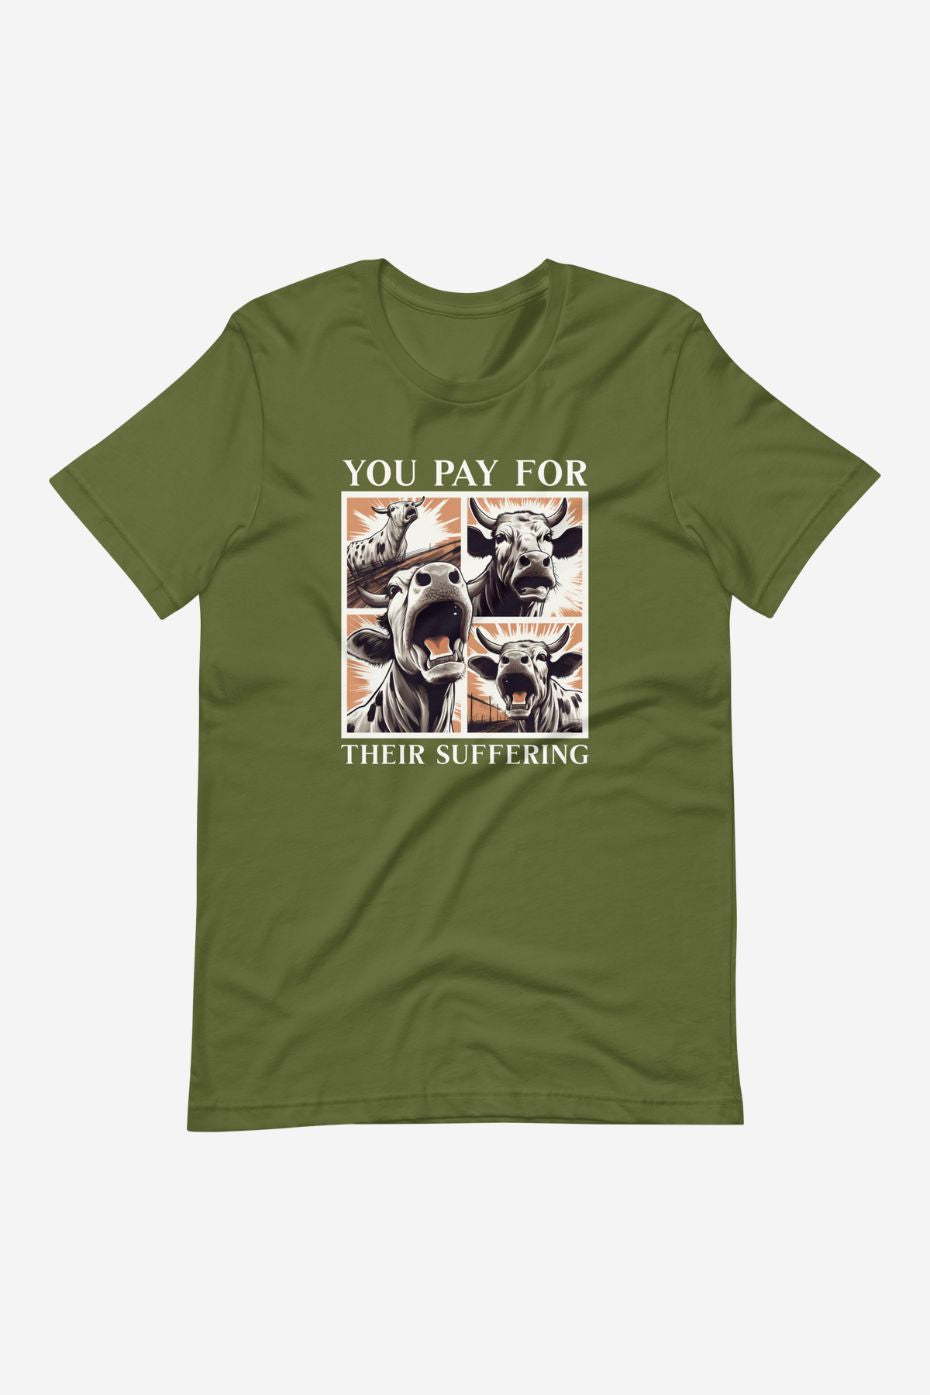 You Pay For Their Suffering - Unisex t-shirt